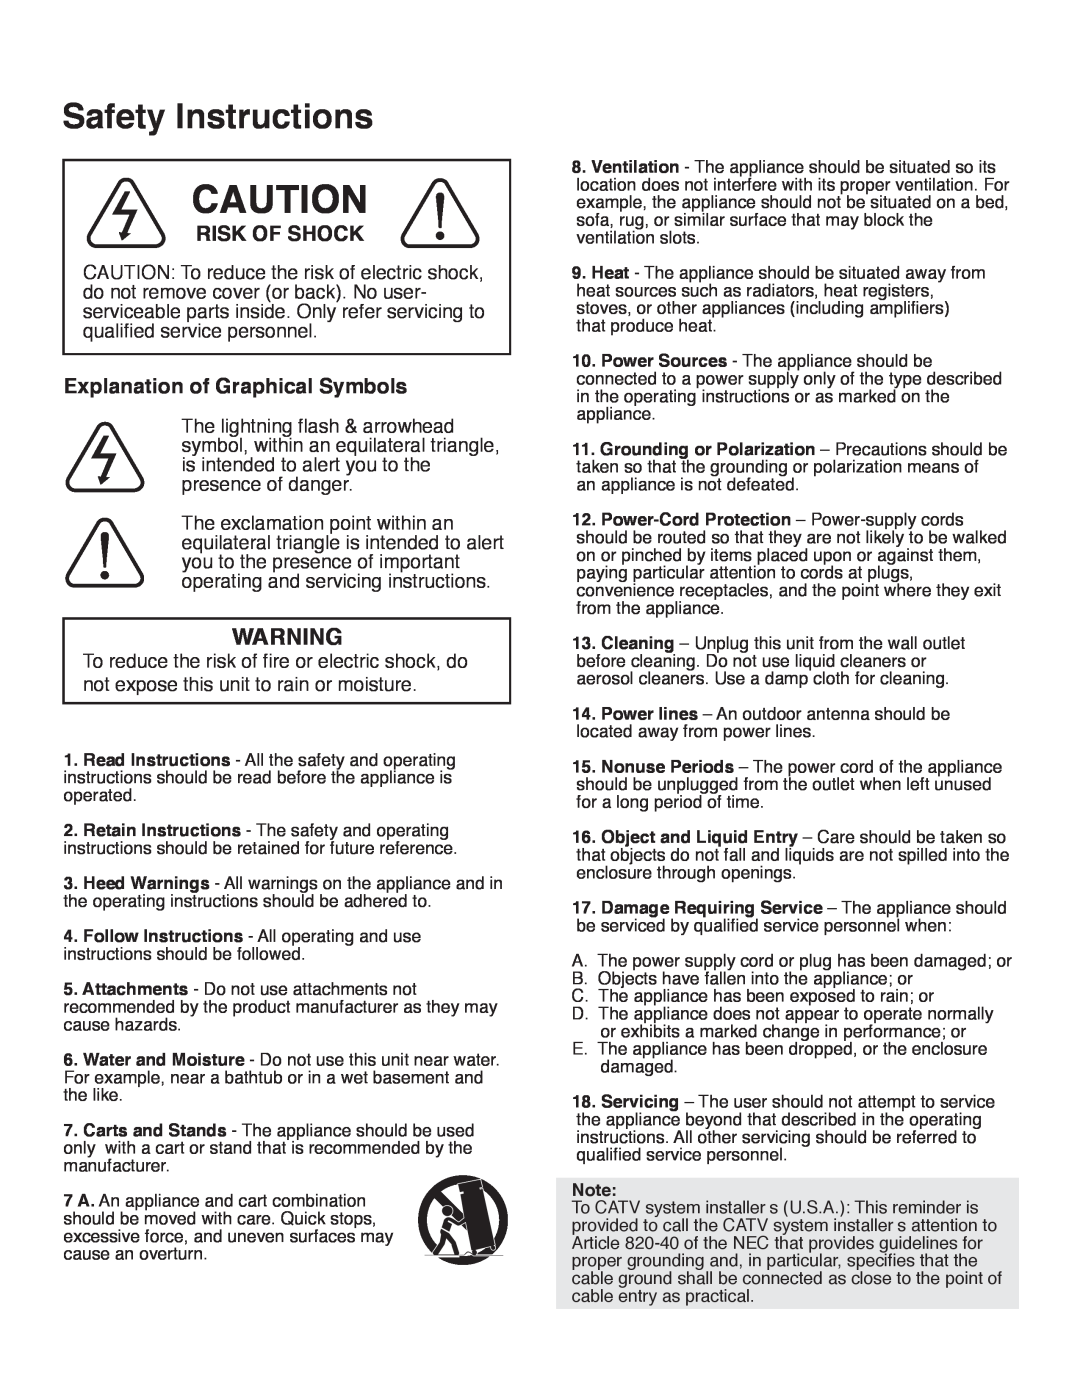 VocoPro UFO-800 specifications Safety Instructions, Risk Of Shock, Explanation of Graphical Symbols 